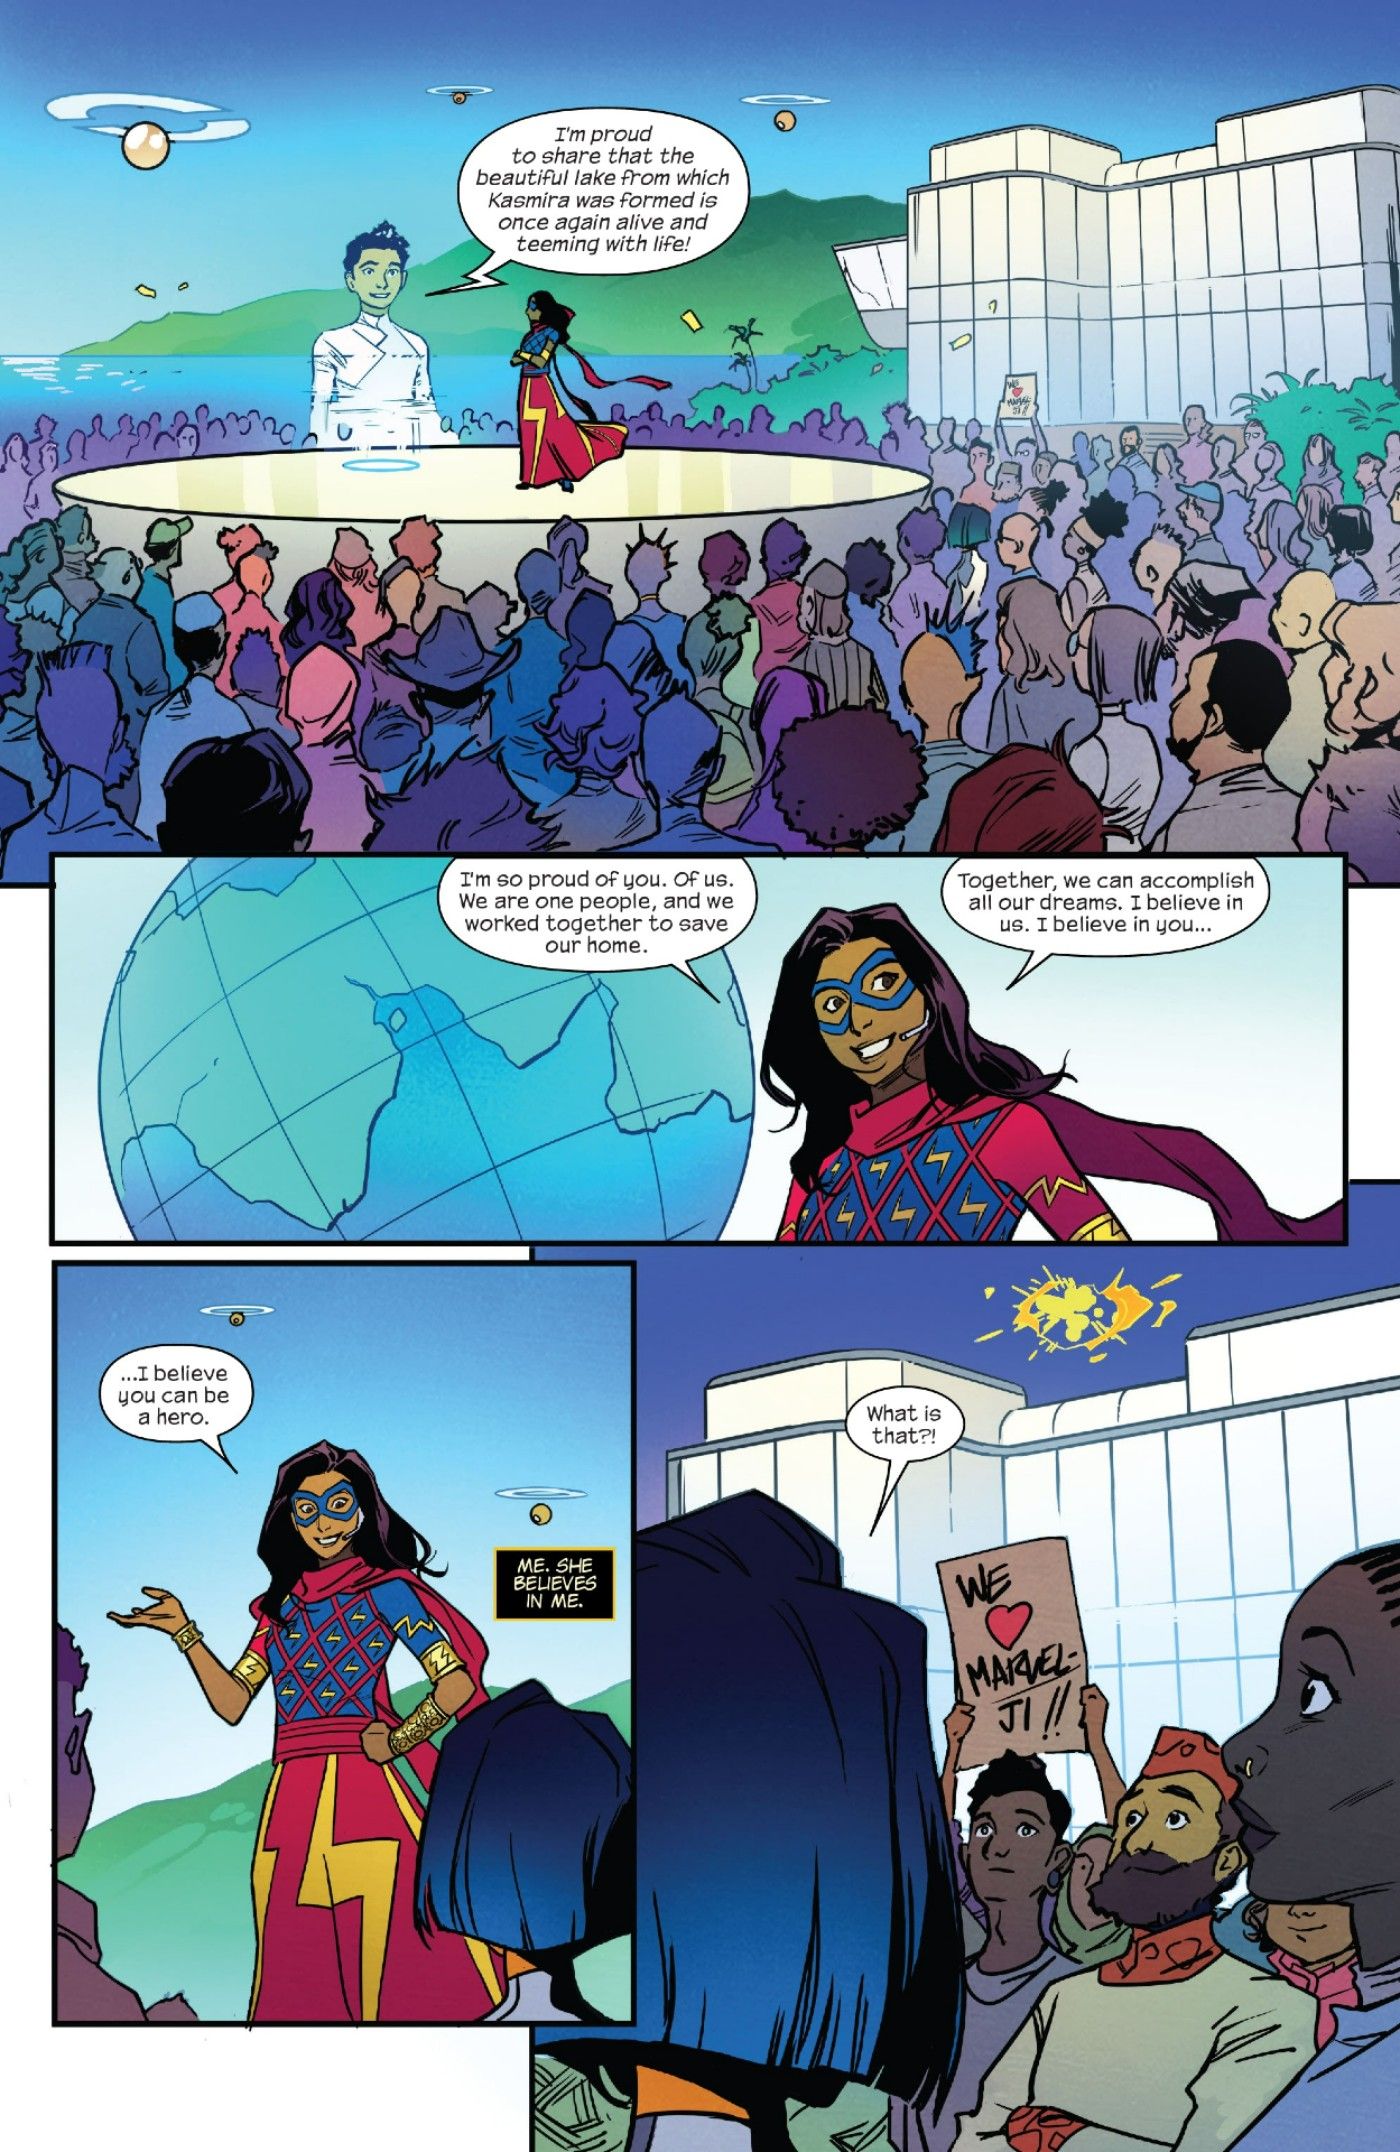 Ms Marvel Beyond the Limit #4 Page #11